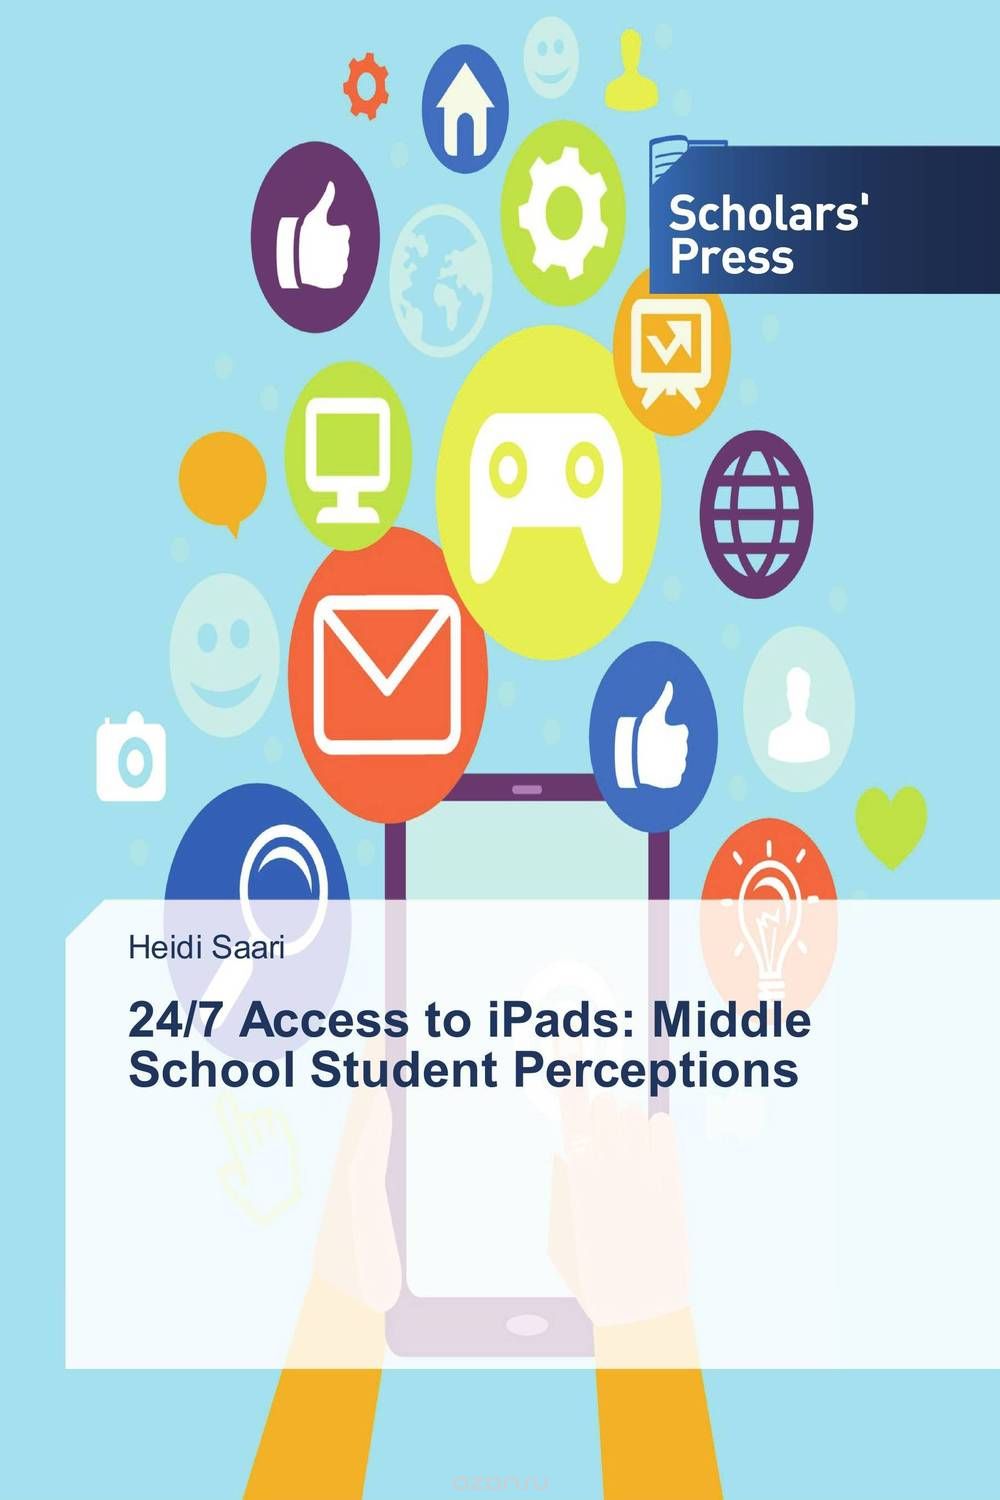 24/7 Access to iPads: Middle School Student Perceptions